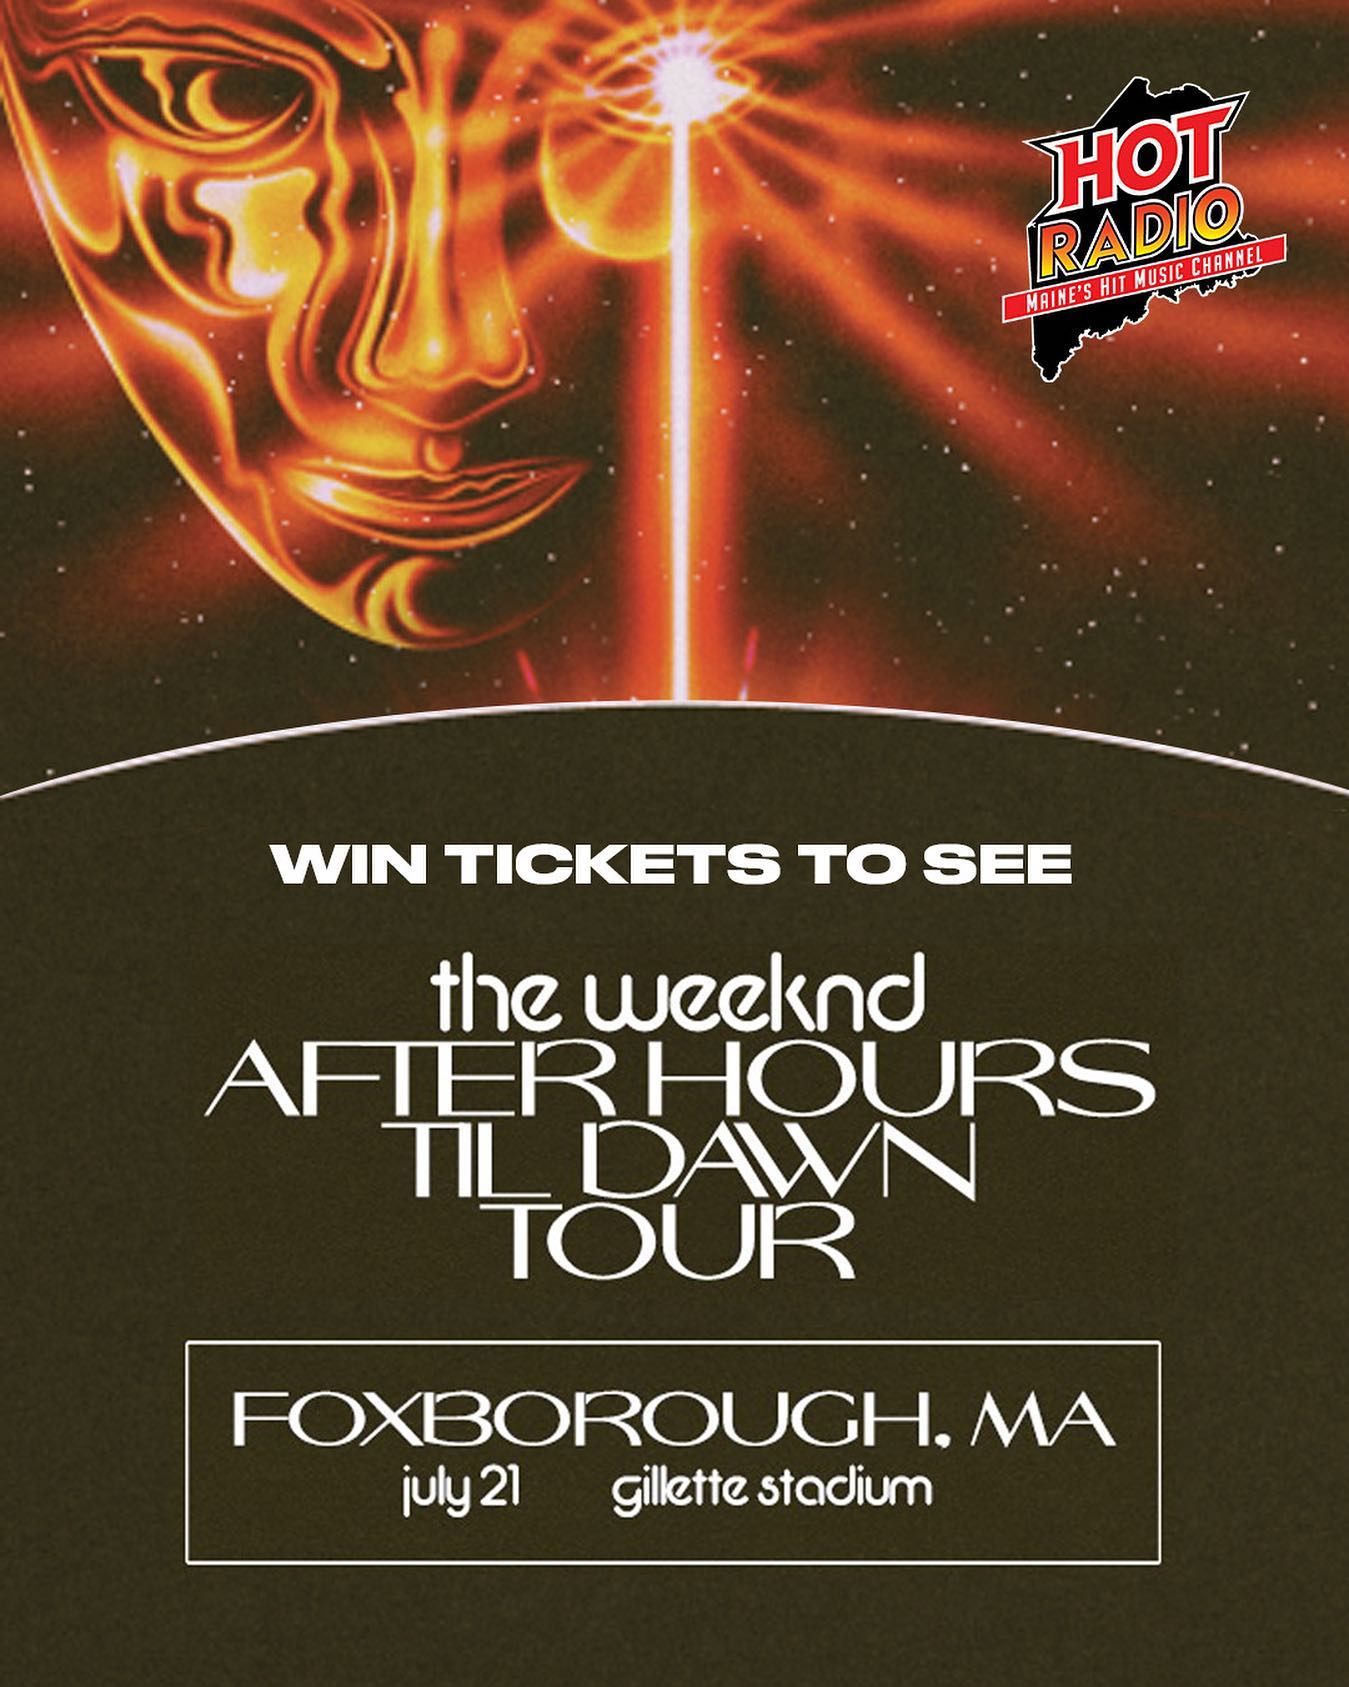 Itâ€™s THE WEEKND all week long ðŸš¨ Listen to Hot Radio Maine at 7am, 8am, and 5pm this week for your chance to win tickets to the After Hours Til Dawn Tour ðŸ”¥